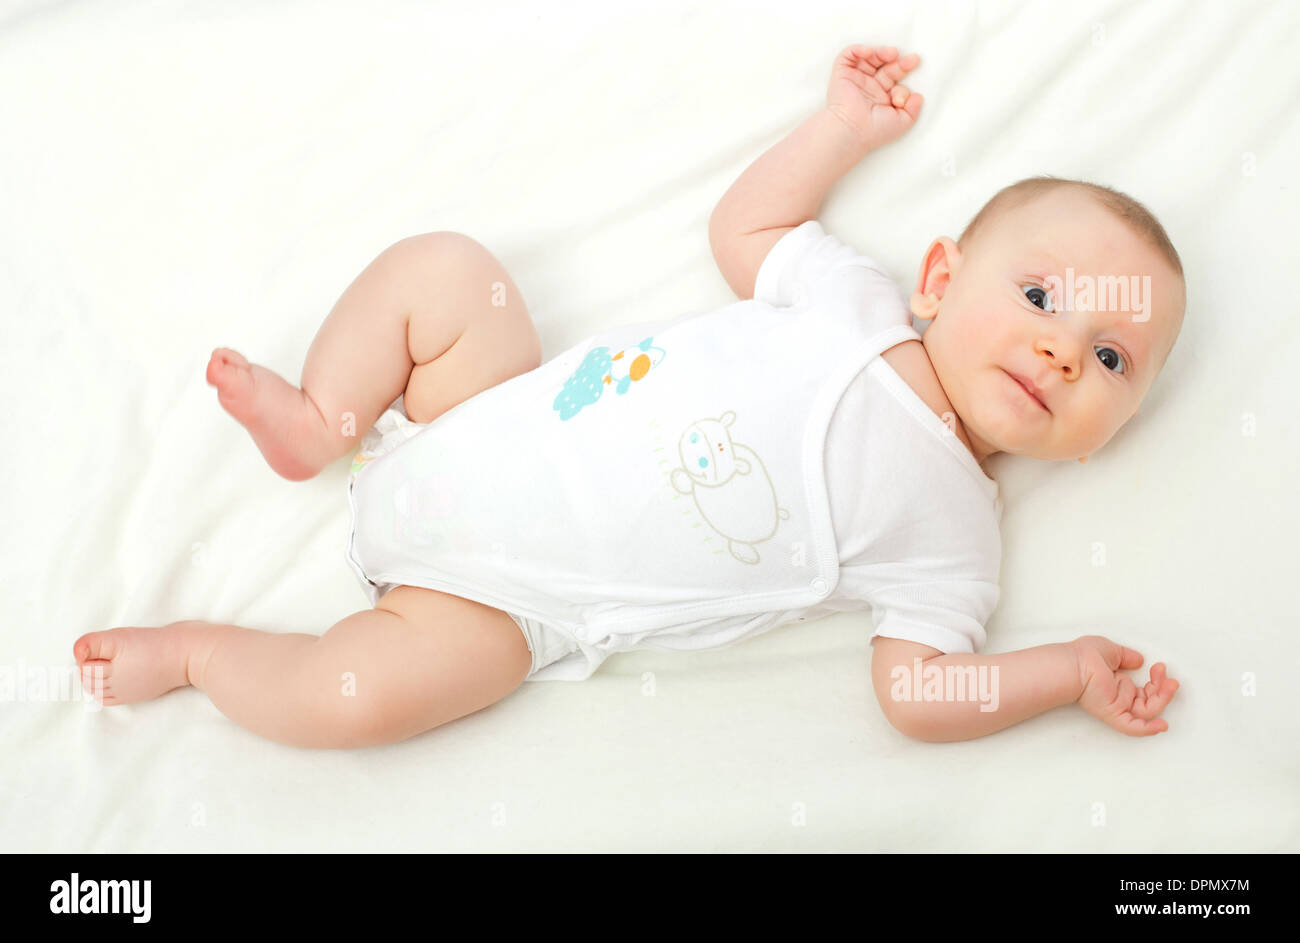 portrait of caucasian young baby Stock Photo